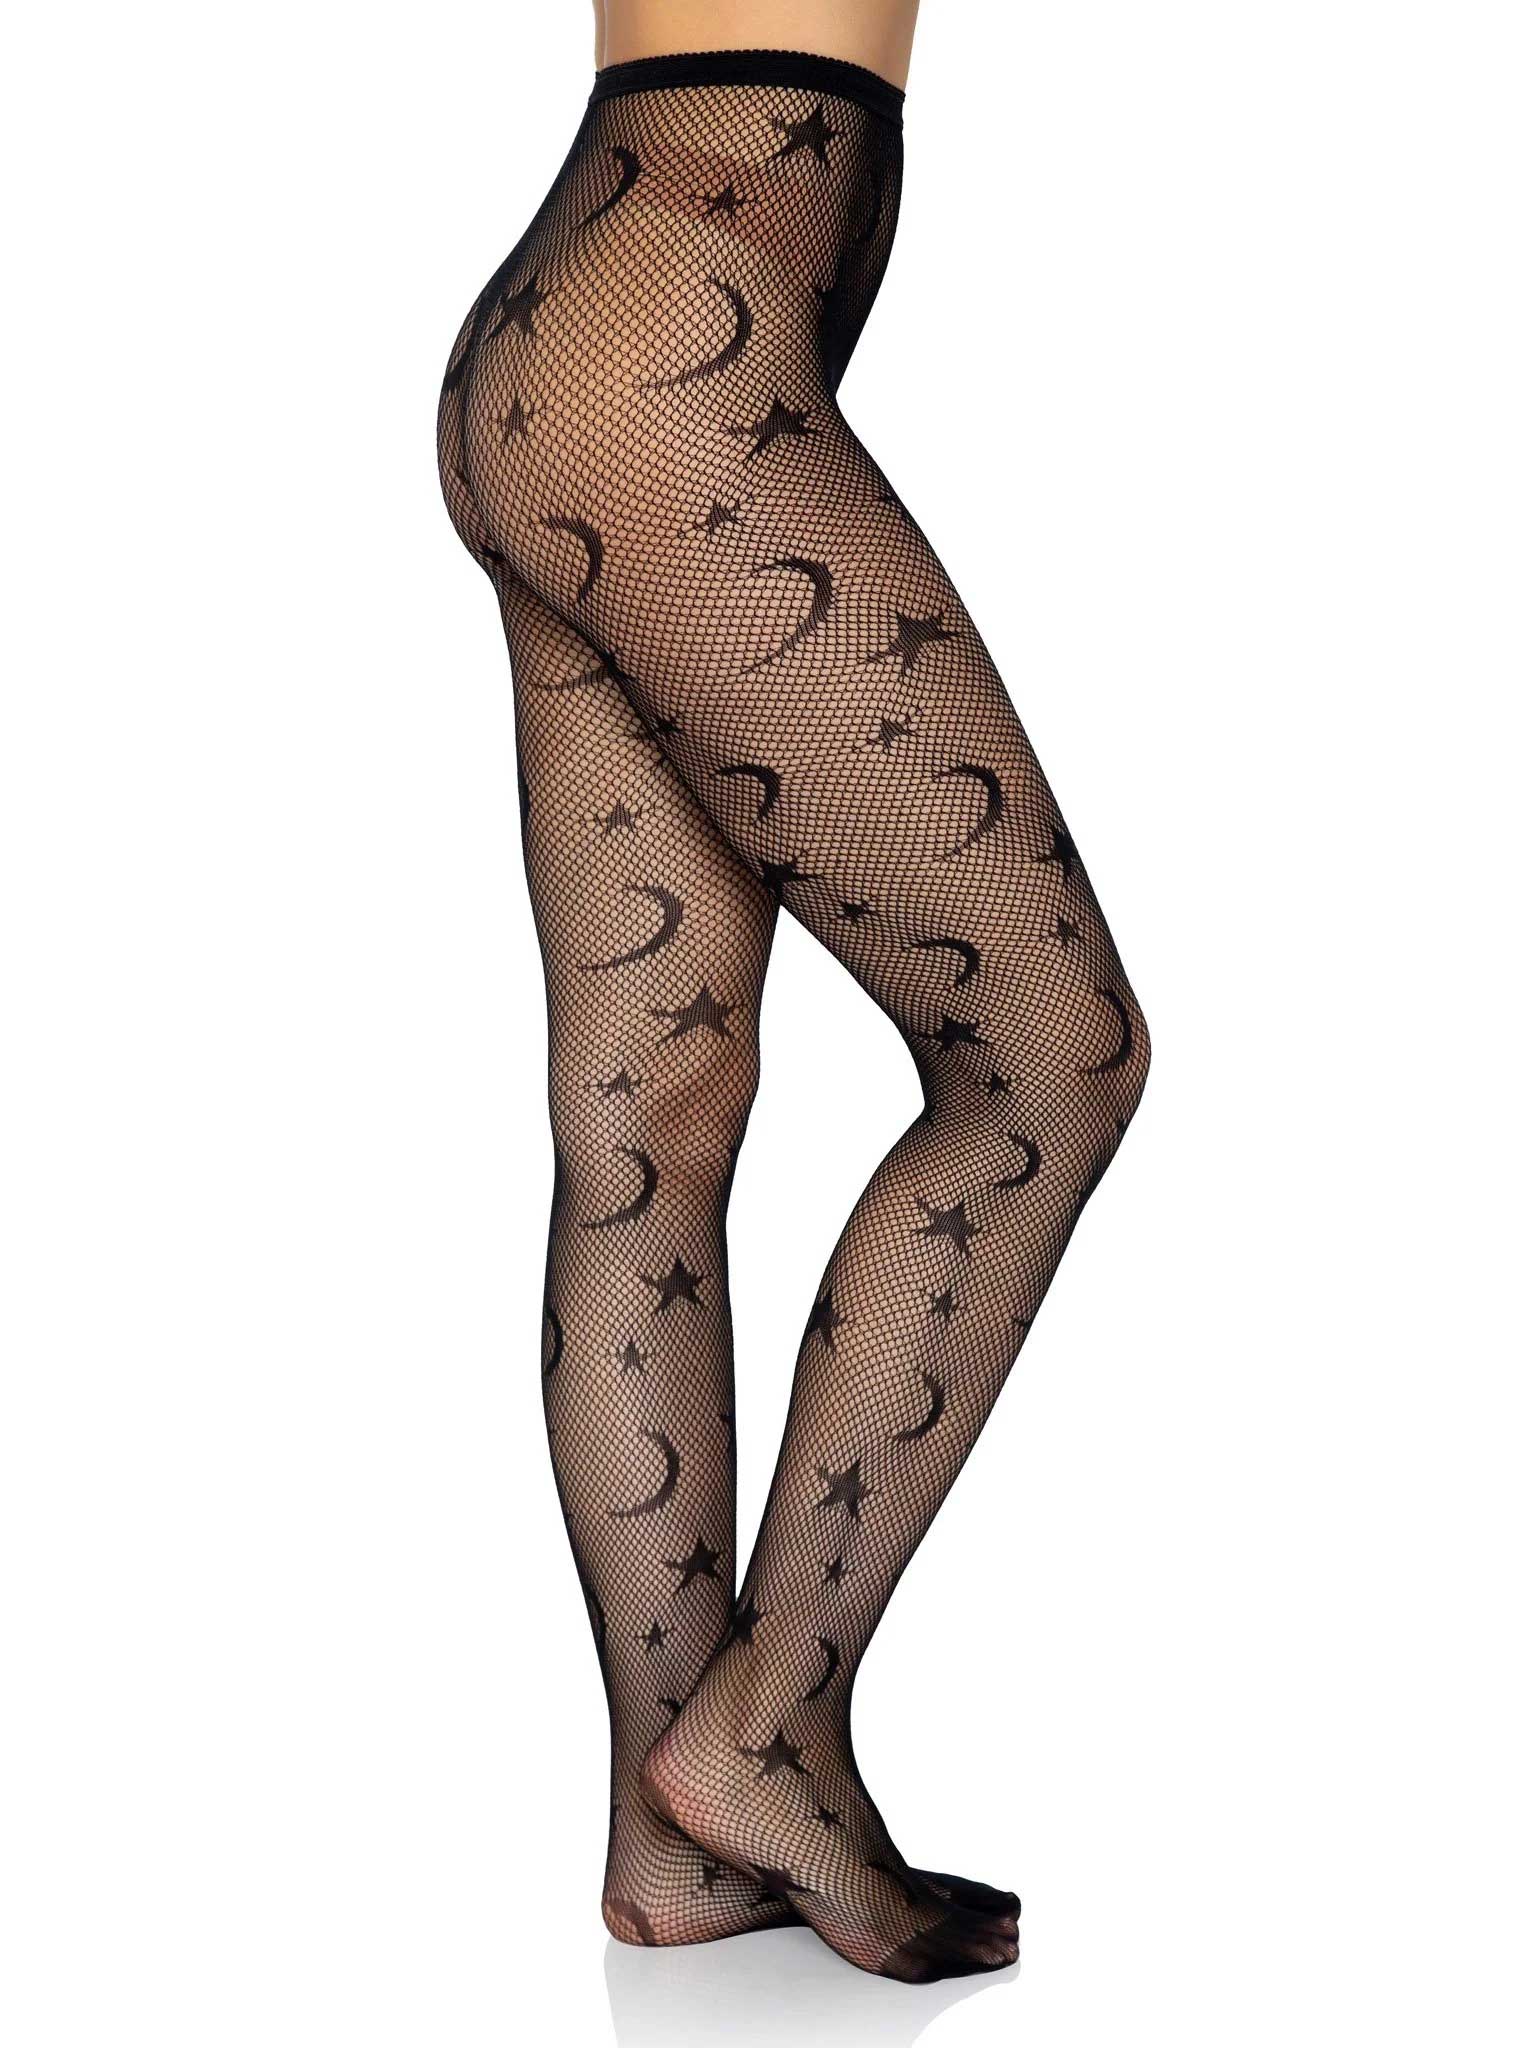 Celestial Net Tights - One Size - Black-2